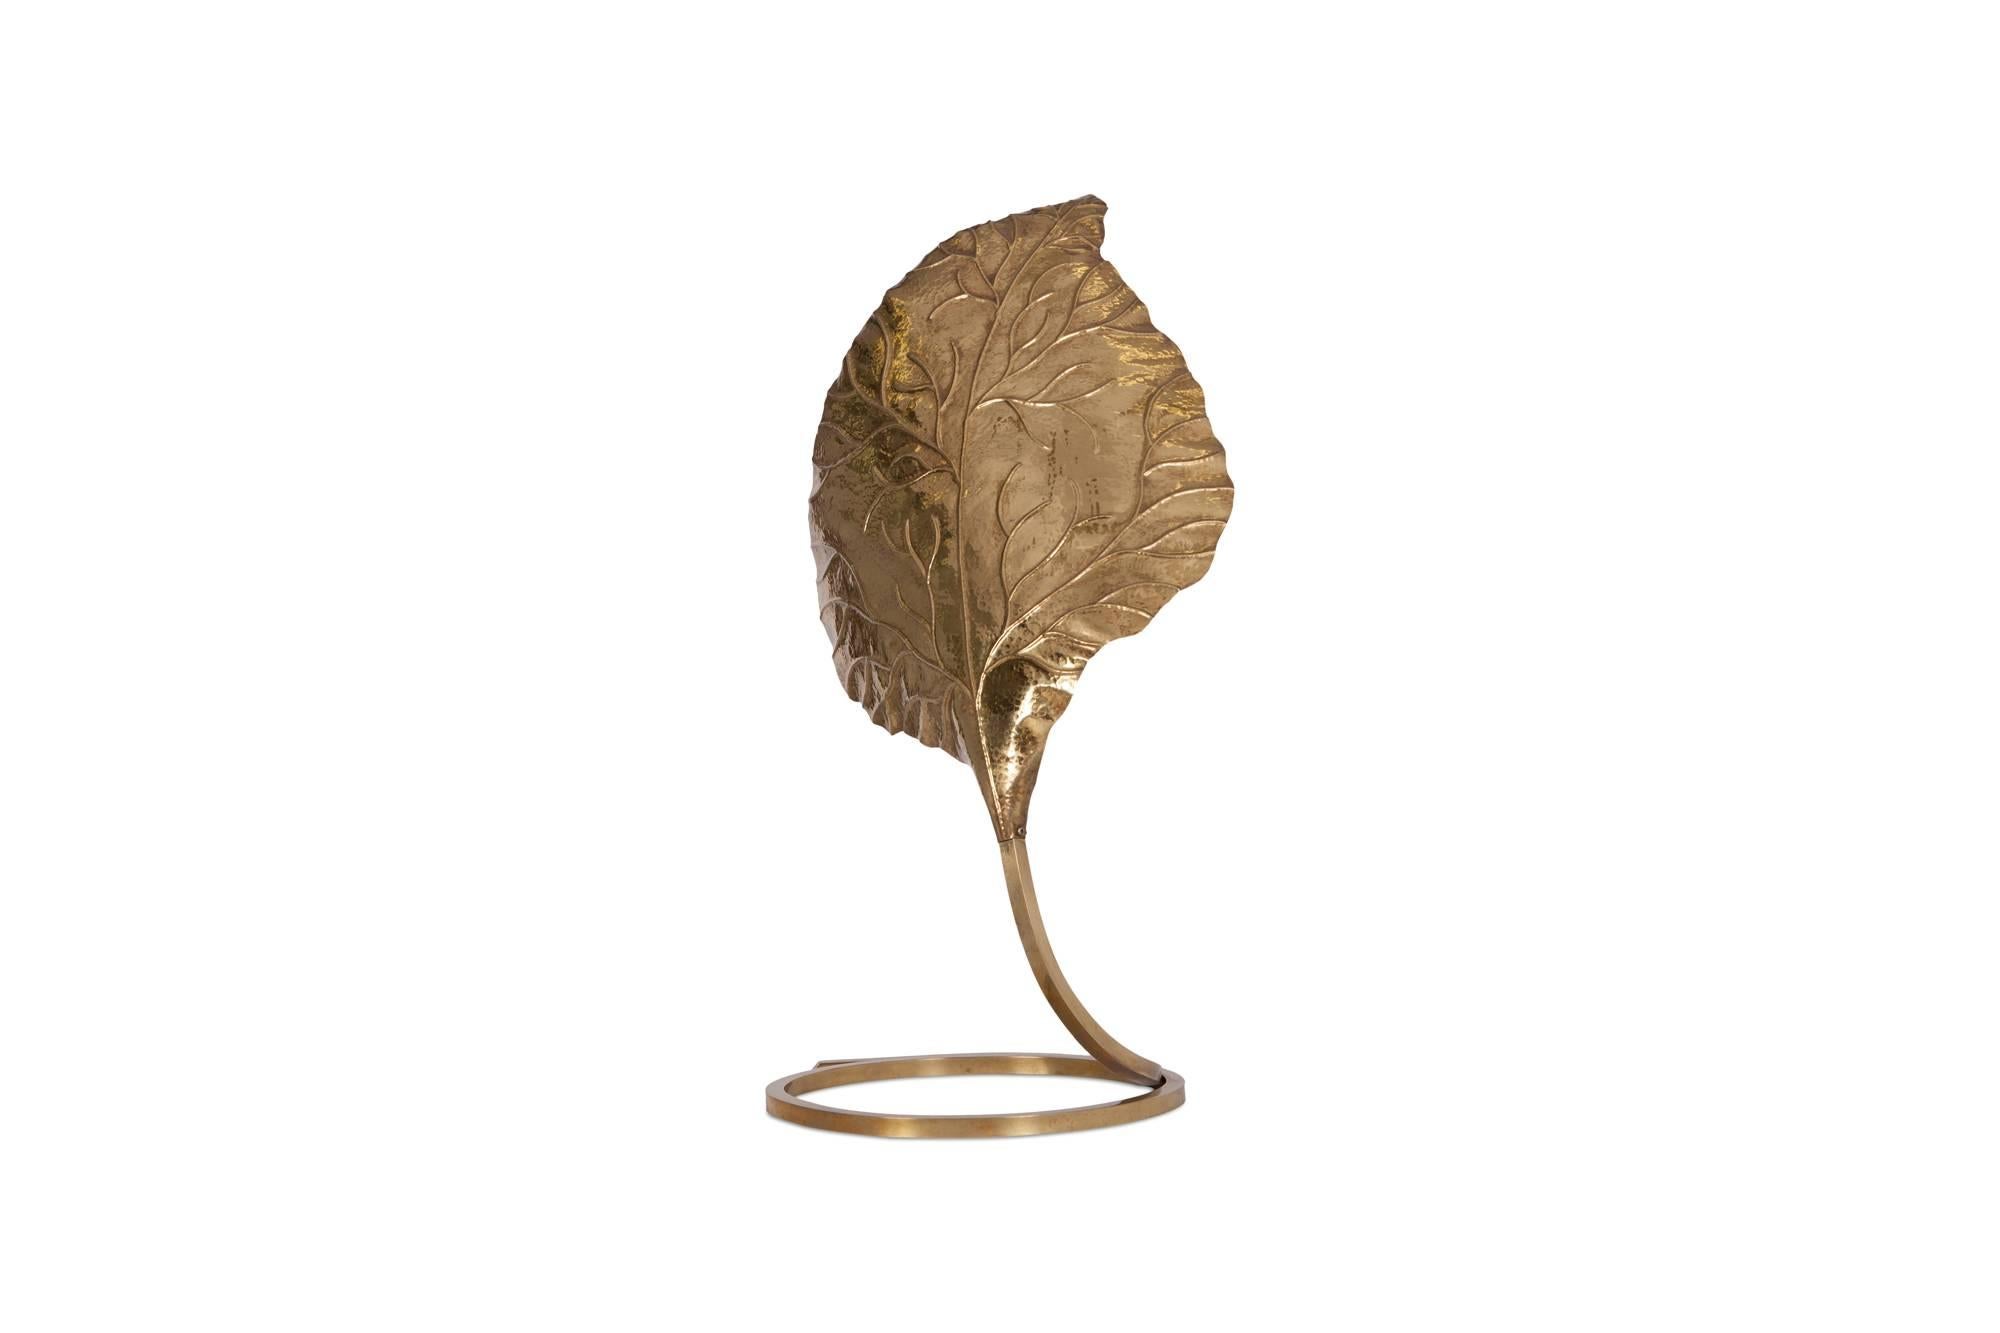 Brass “Rabarbaro” table lamp by Carlo Giorgi for Bottega Gadda, Italy, the 1970s.

The Rhubarb shaped leaf is completely hammered by hand, showing the great skill of craftsmanship which Carlo Giorgi was well known for. The handcrafted element